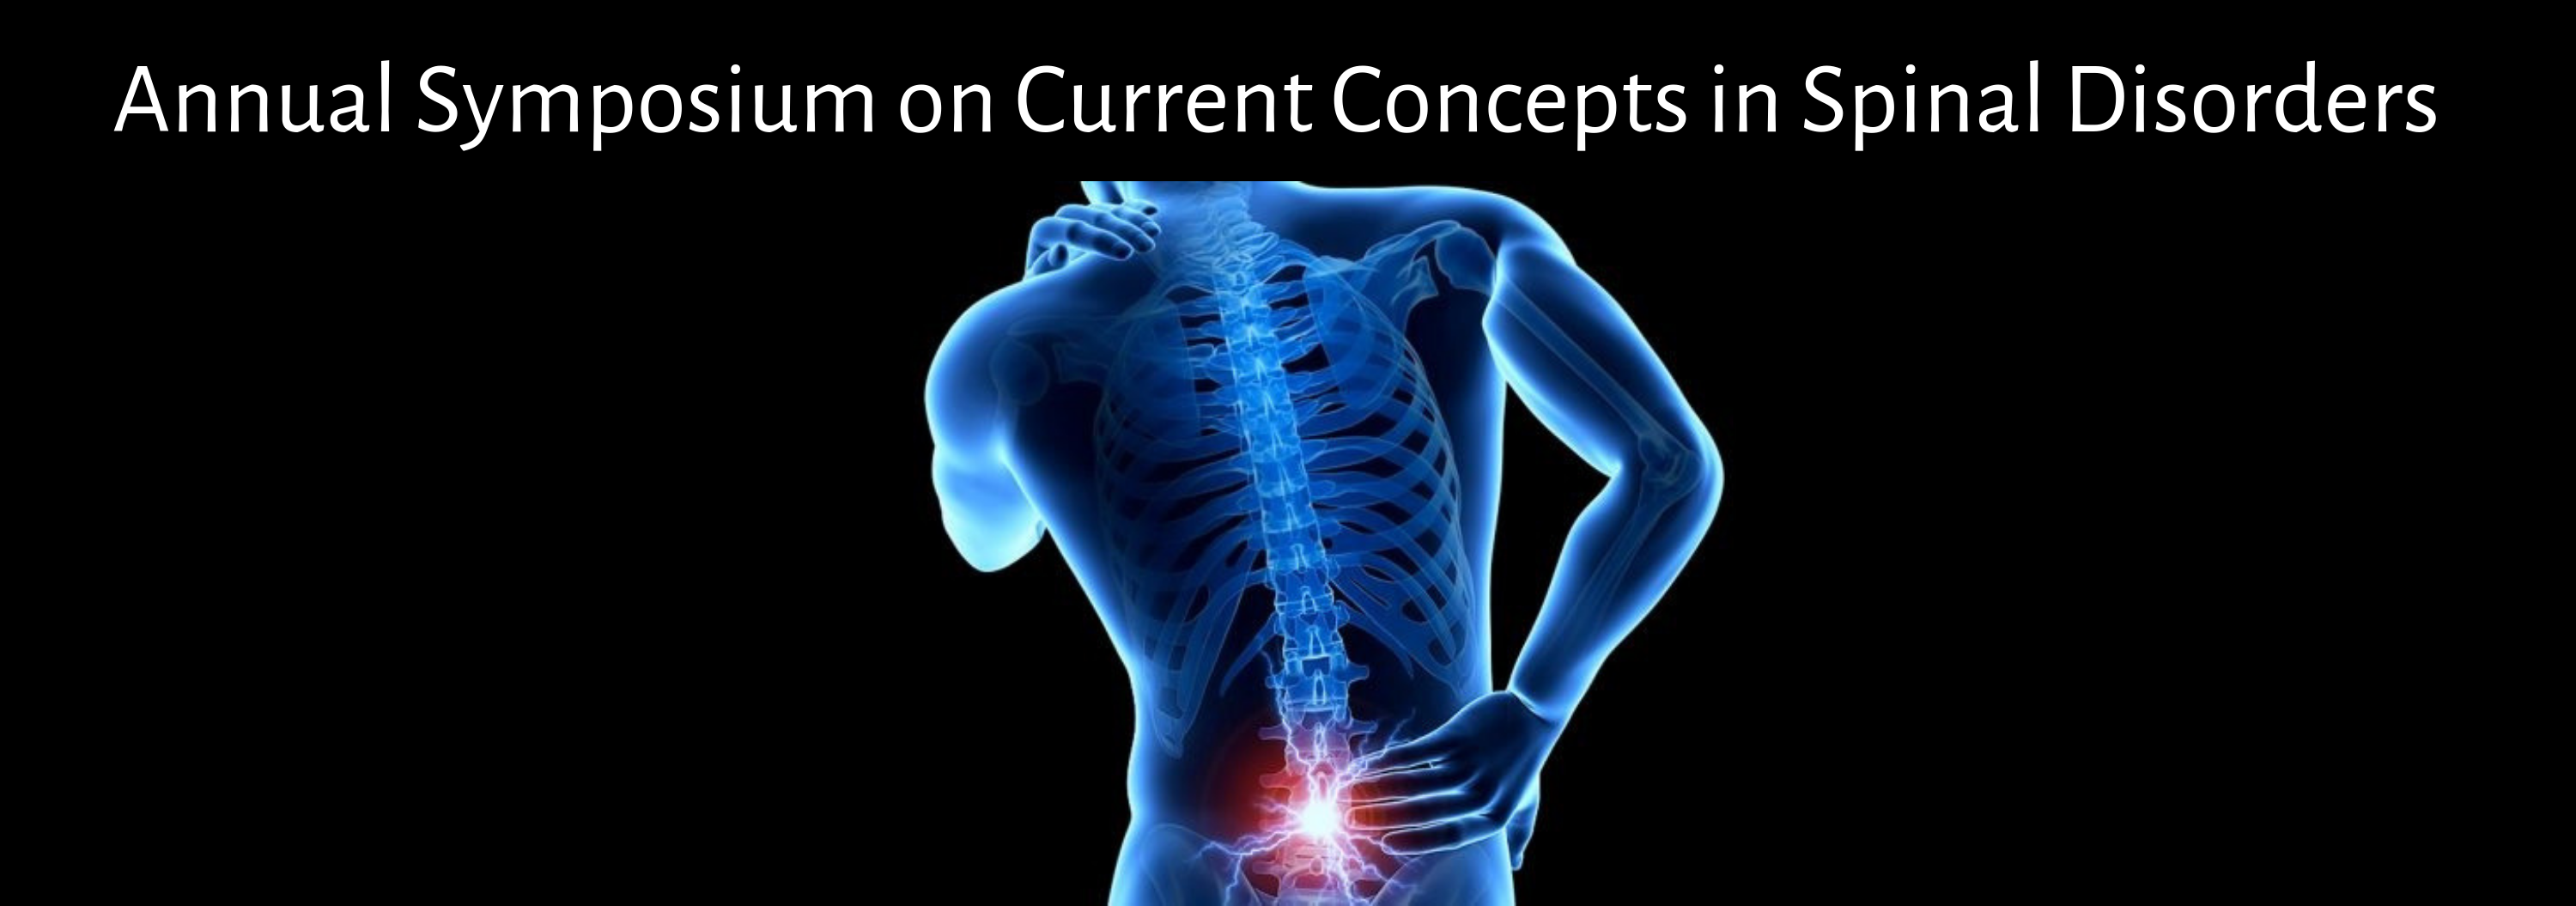 19th Annual Symposium on Current Concepts in Spinal Disorders Banner